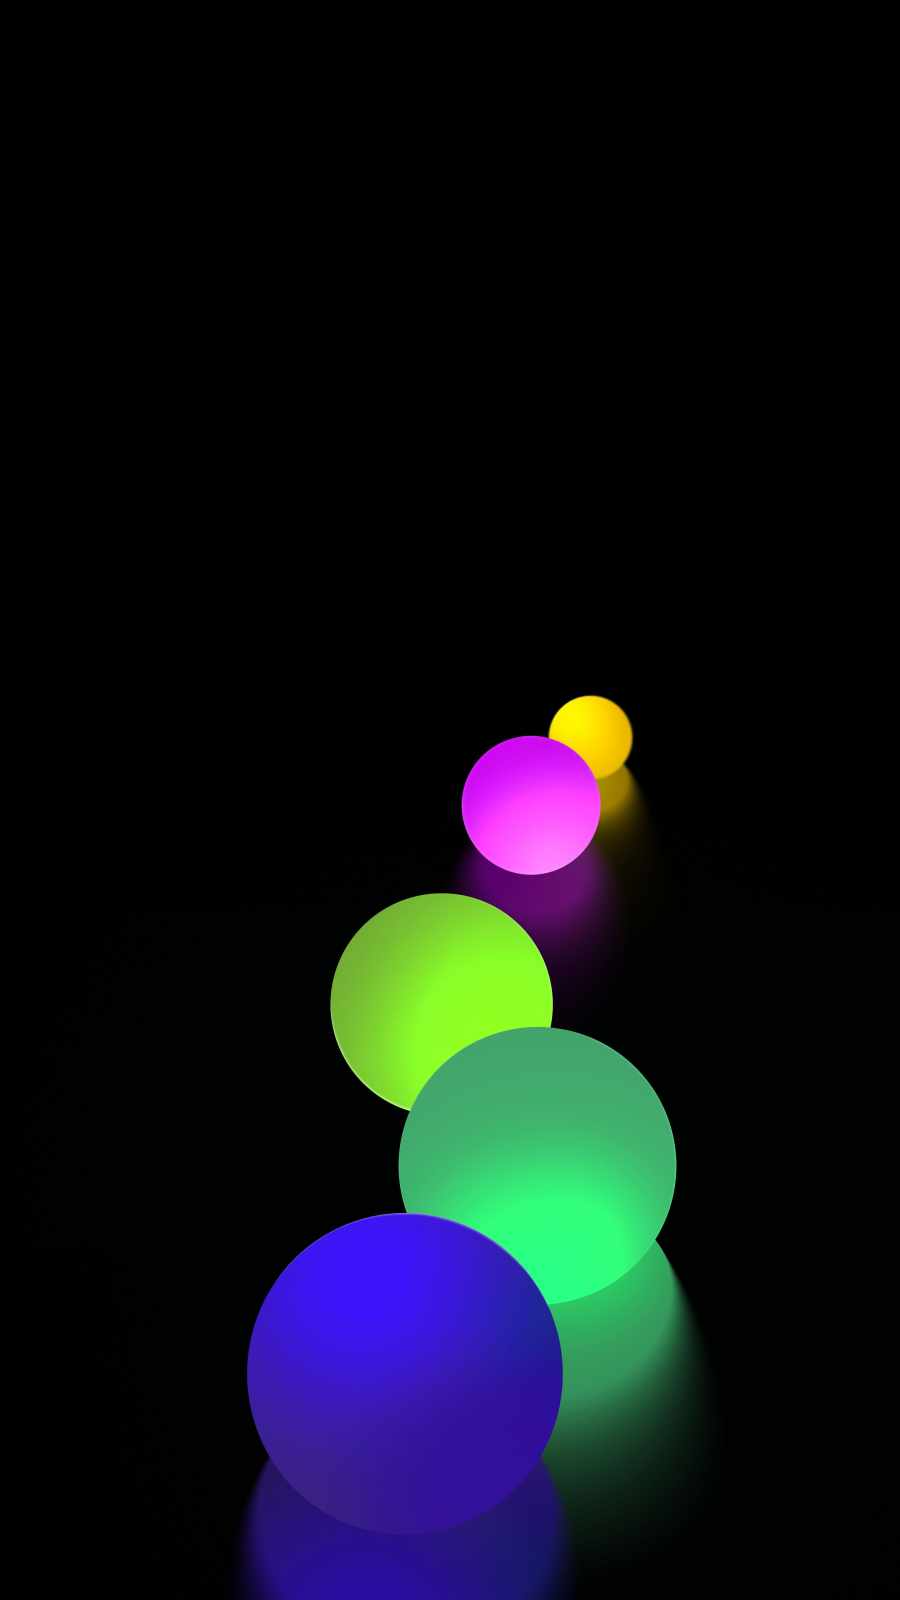 Amoled Colorful Balls IPhone Wallpaper  IPhone Wallpapers